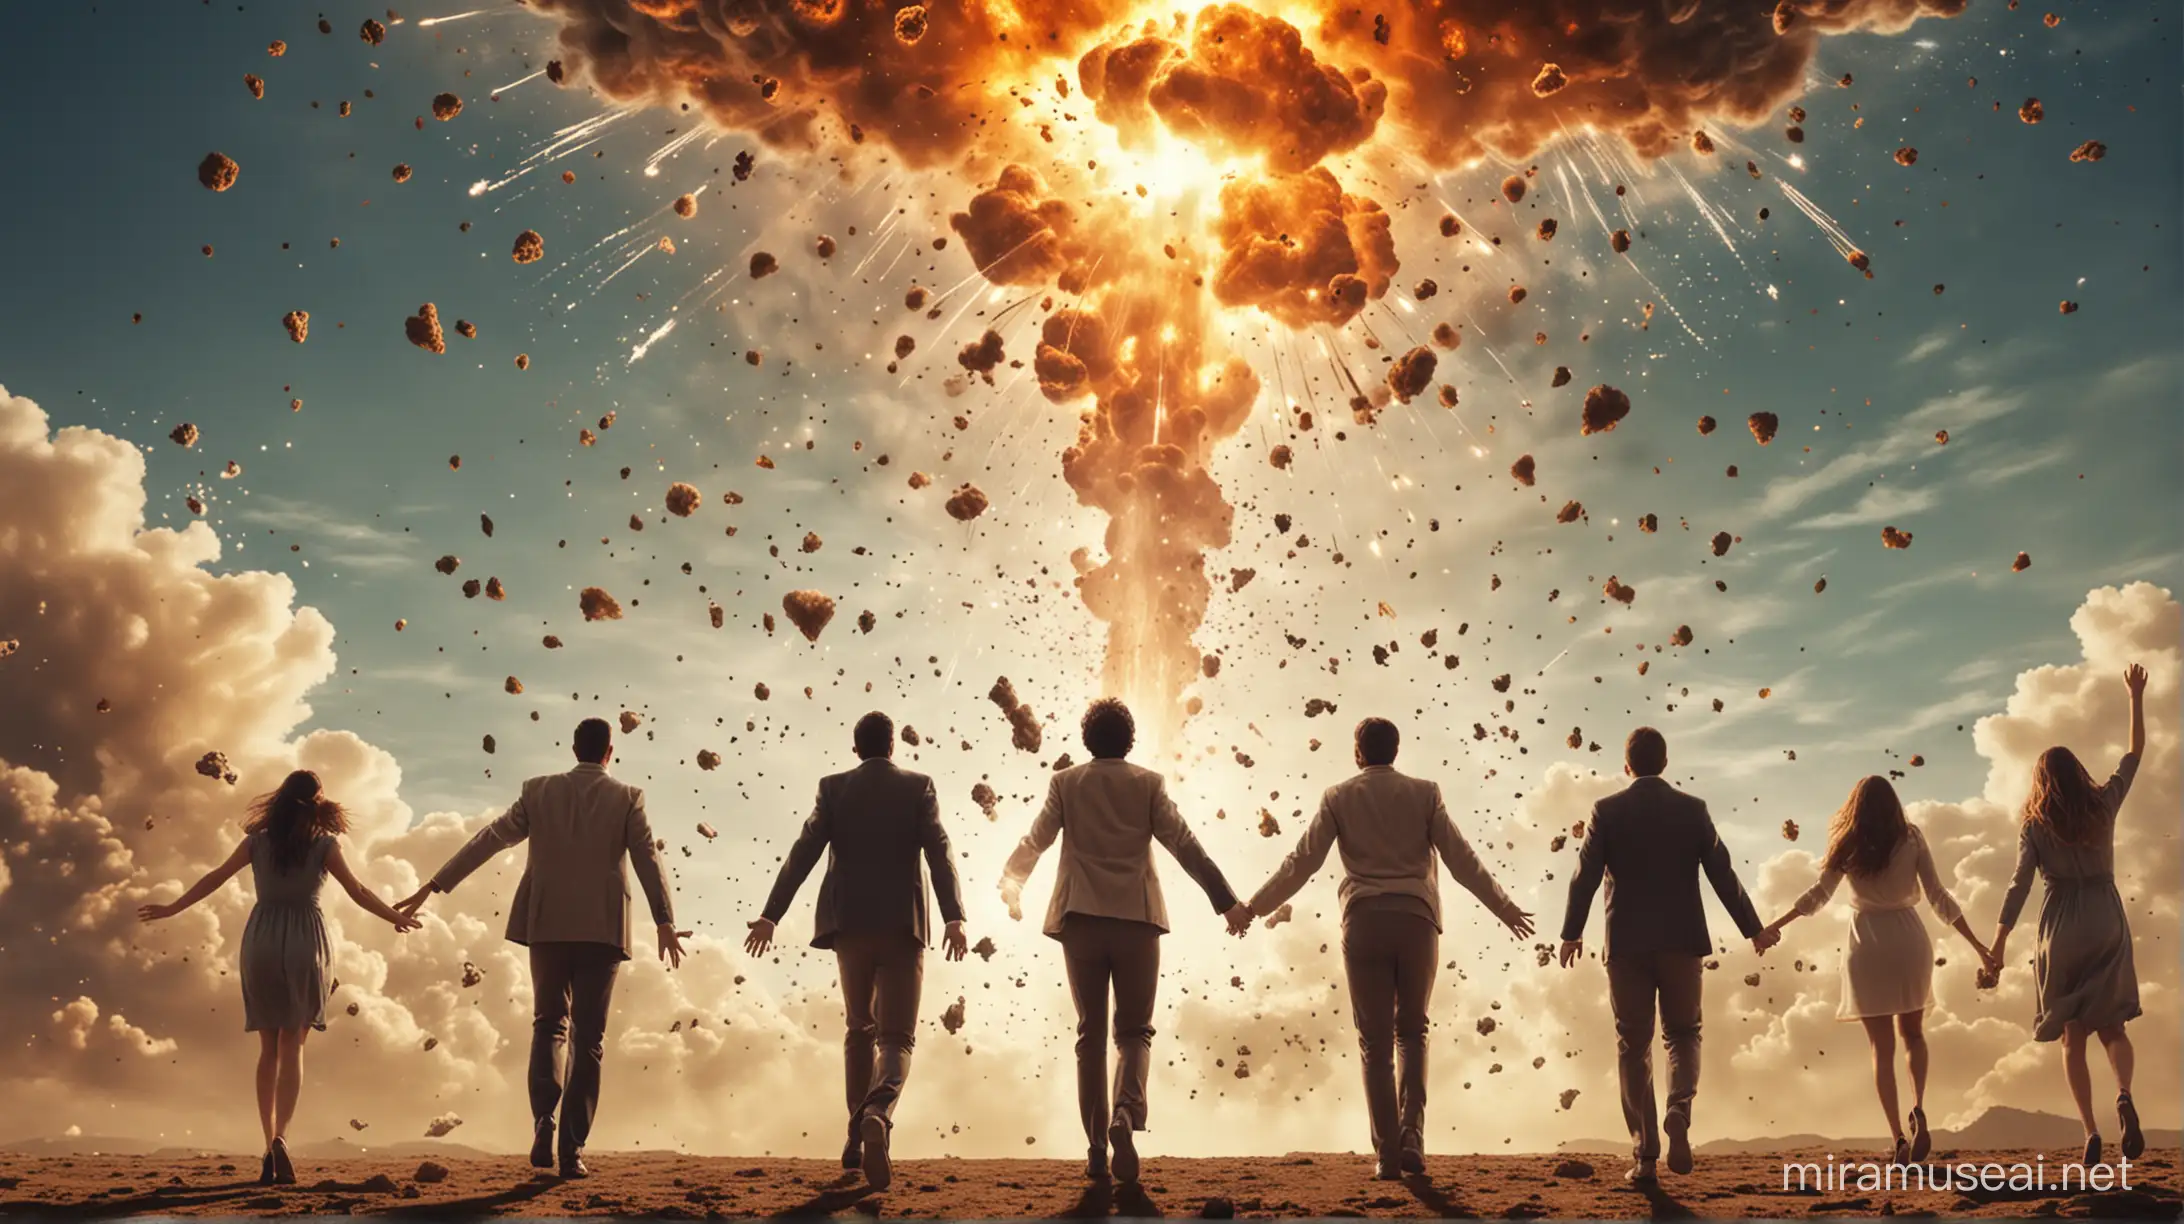 Group of people floating up into the sky with explosions around them rapture